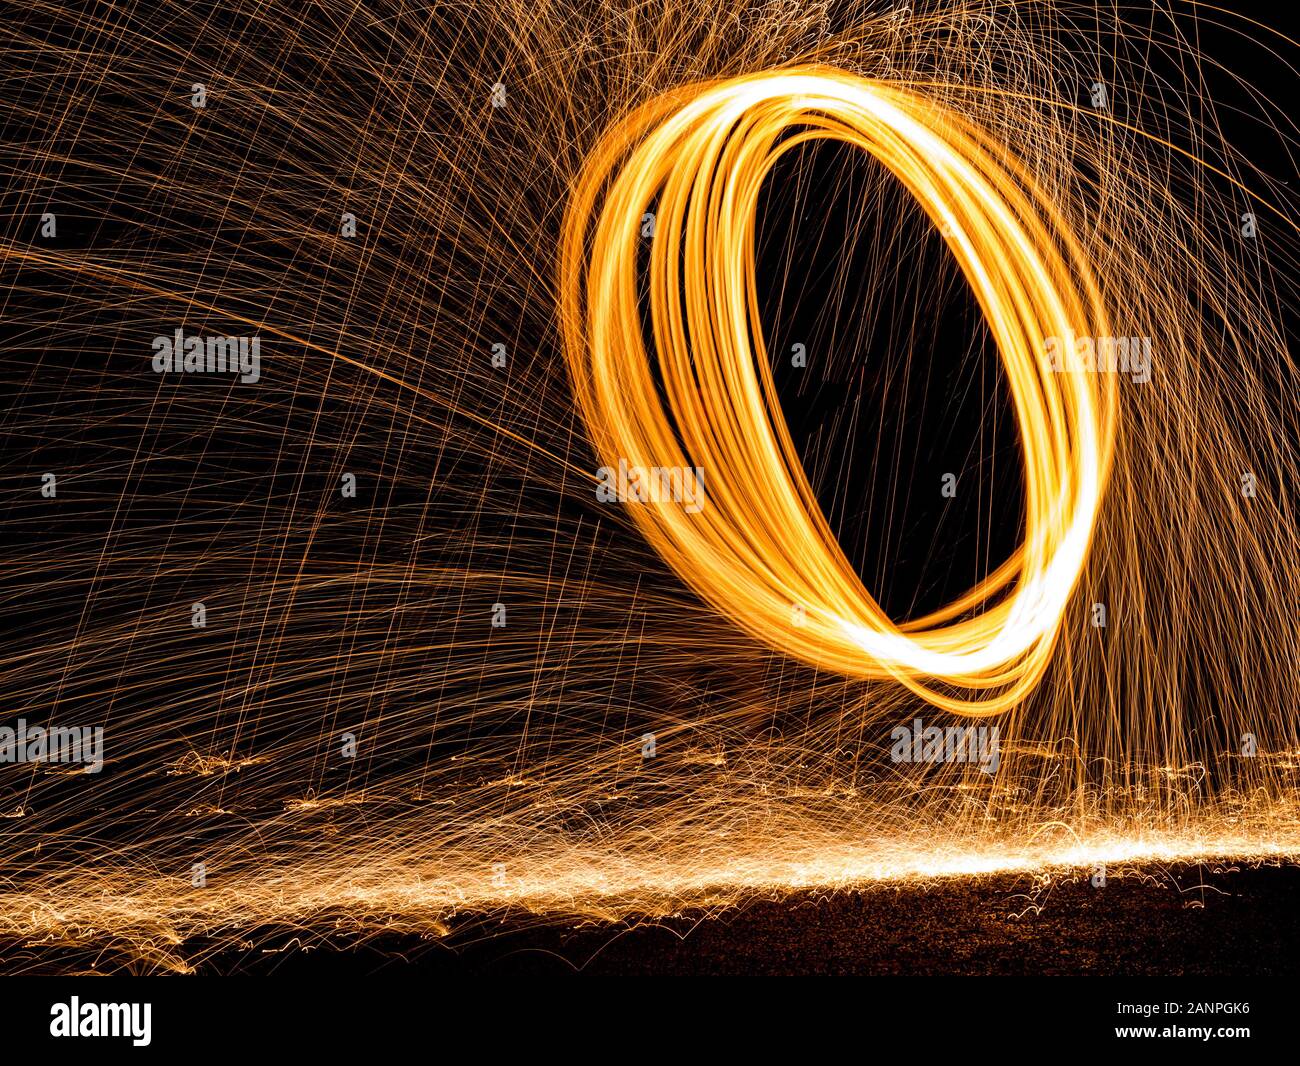 Steel wool painting with light in darkness spark effect Stock Photo